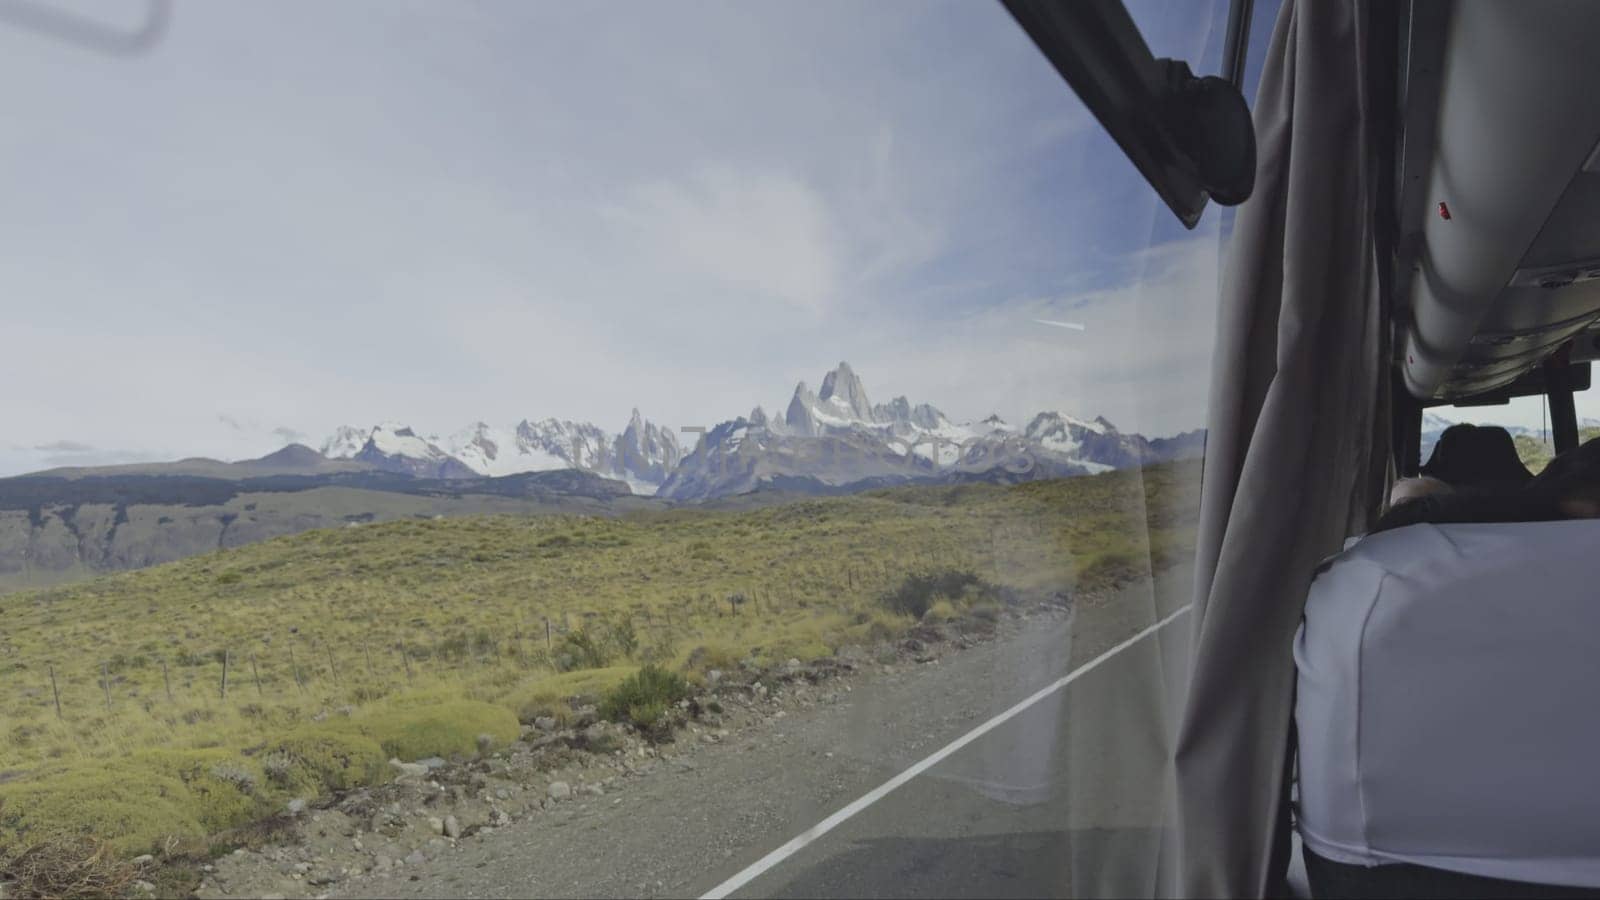 Wide-angle mountain view through a bus window while traveling.